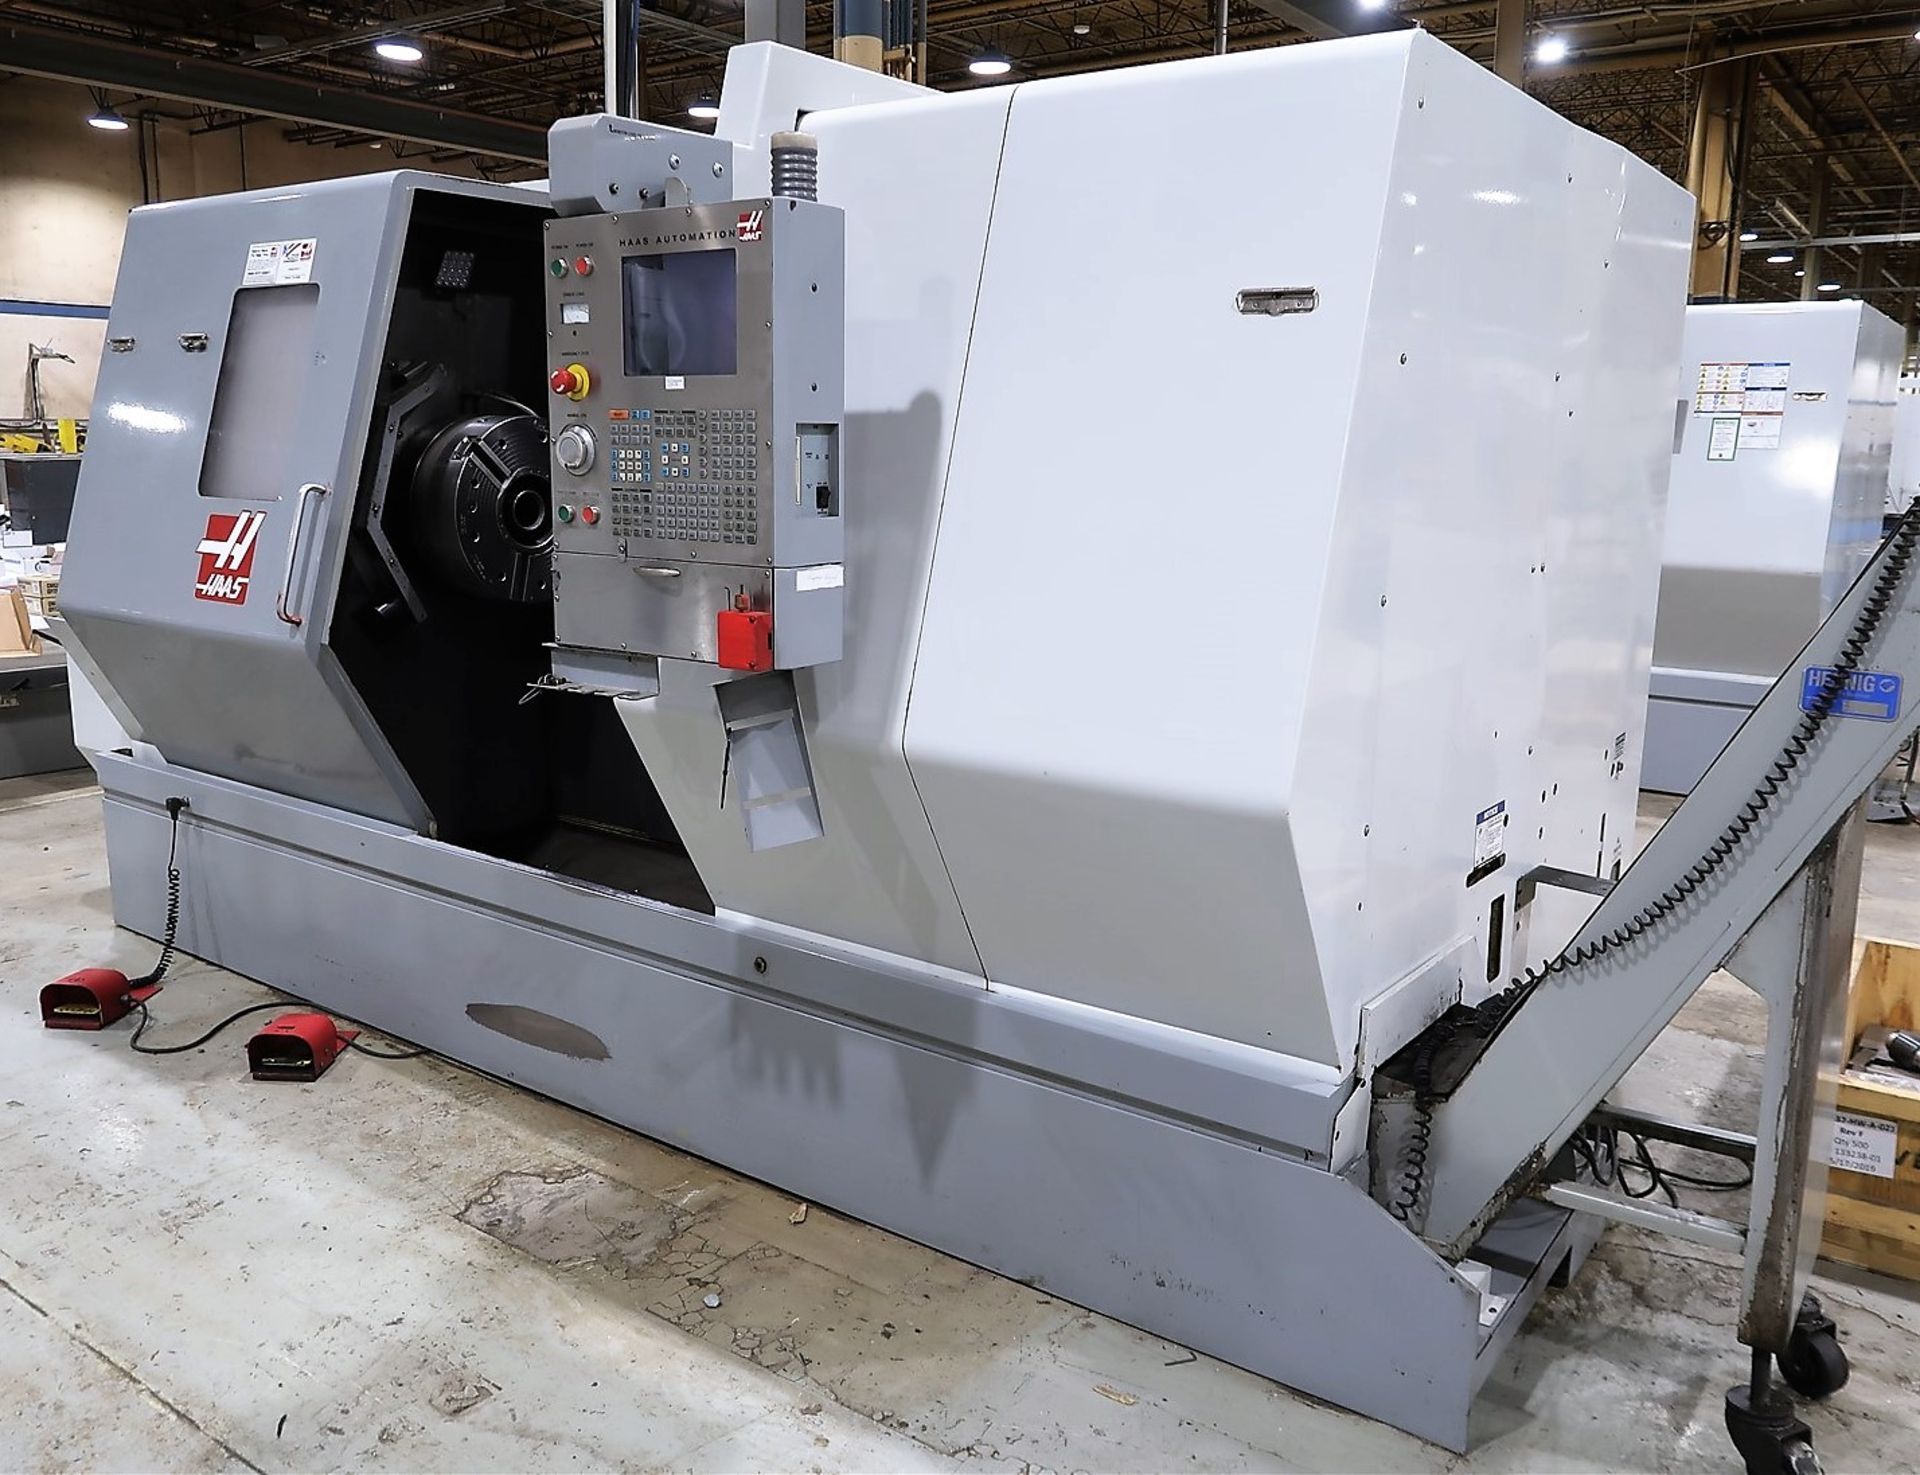 2005 HAAS SL-40TB CNC HORIZONTAL TURNING CENTER, 7.1 IN. BORE, HAAS CNC CONTROL, 10-STATION - Image 5 of 22